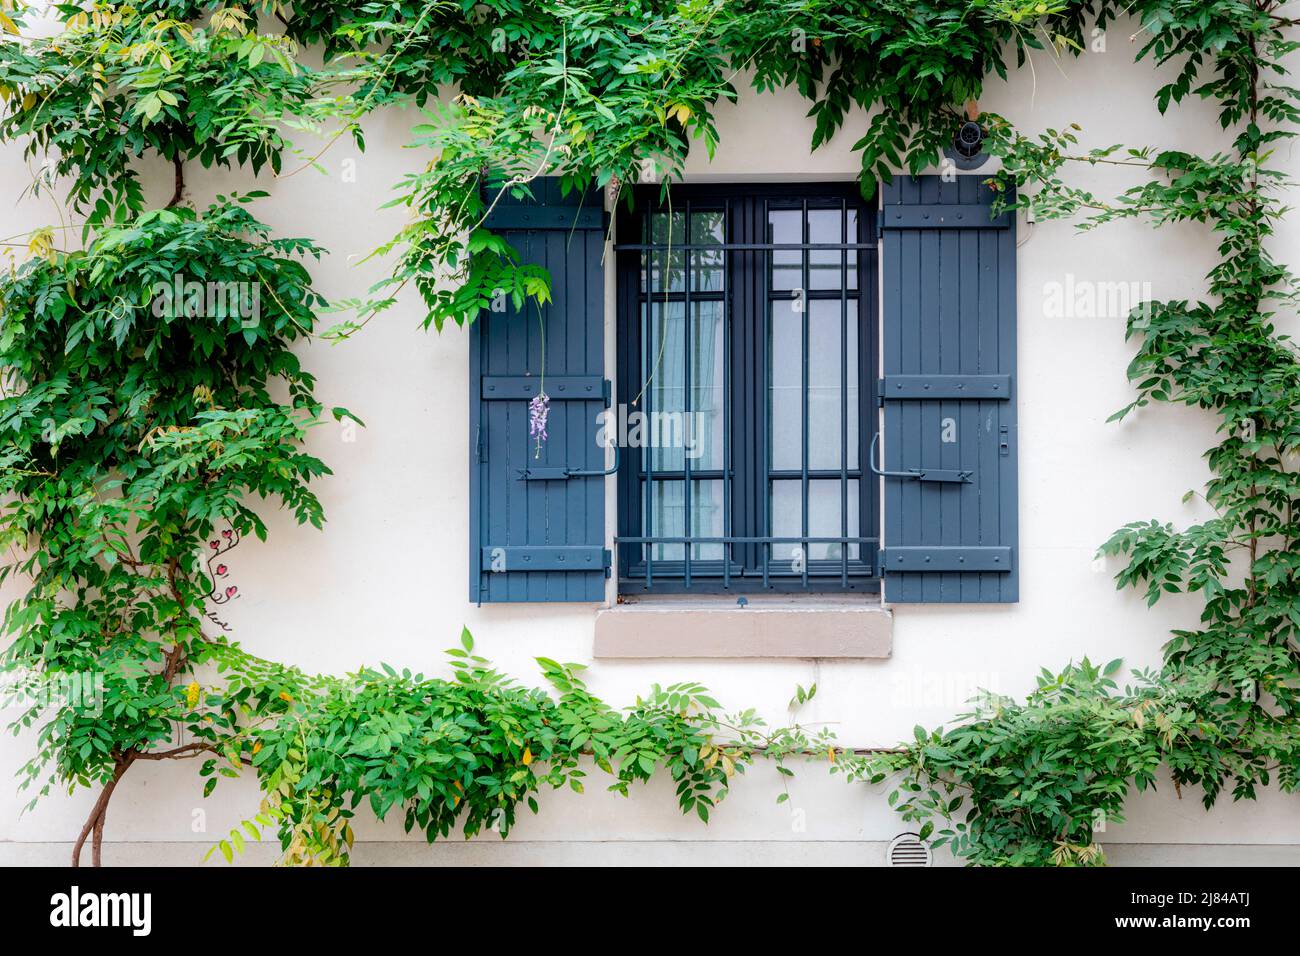 Green vines surround a window and shutters in Montmartre, Paris, France Stock Photo